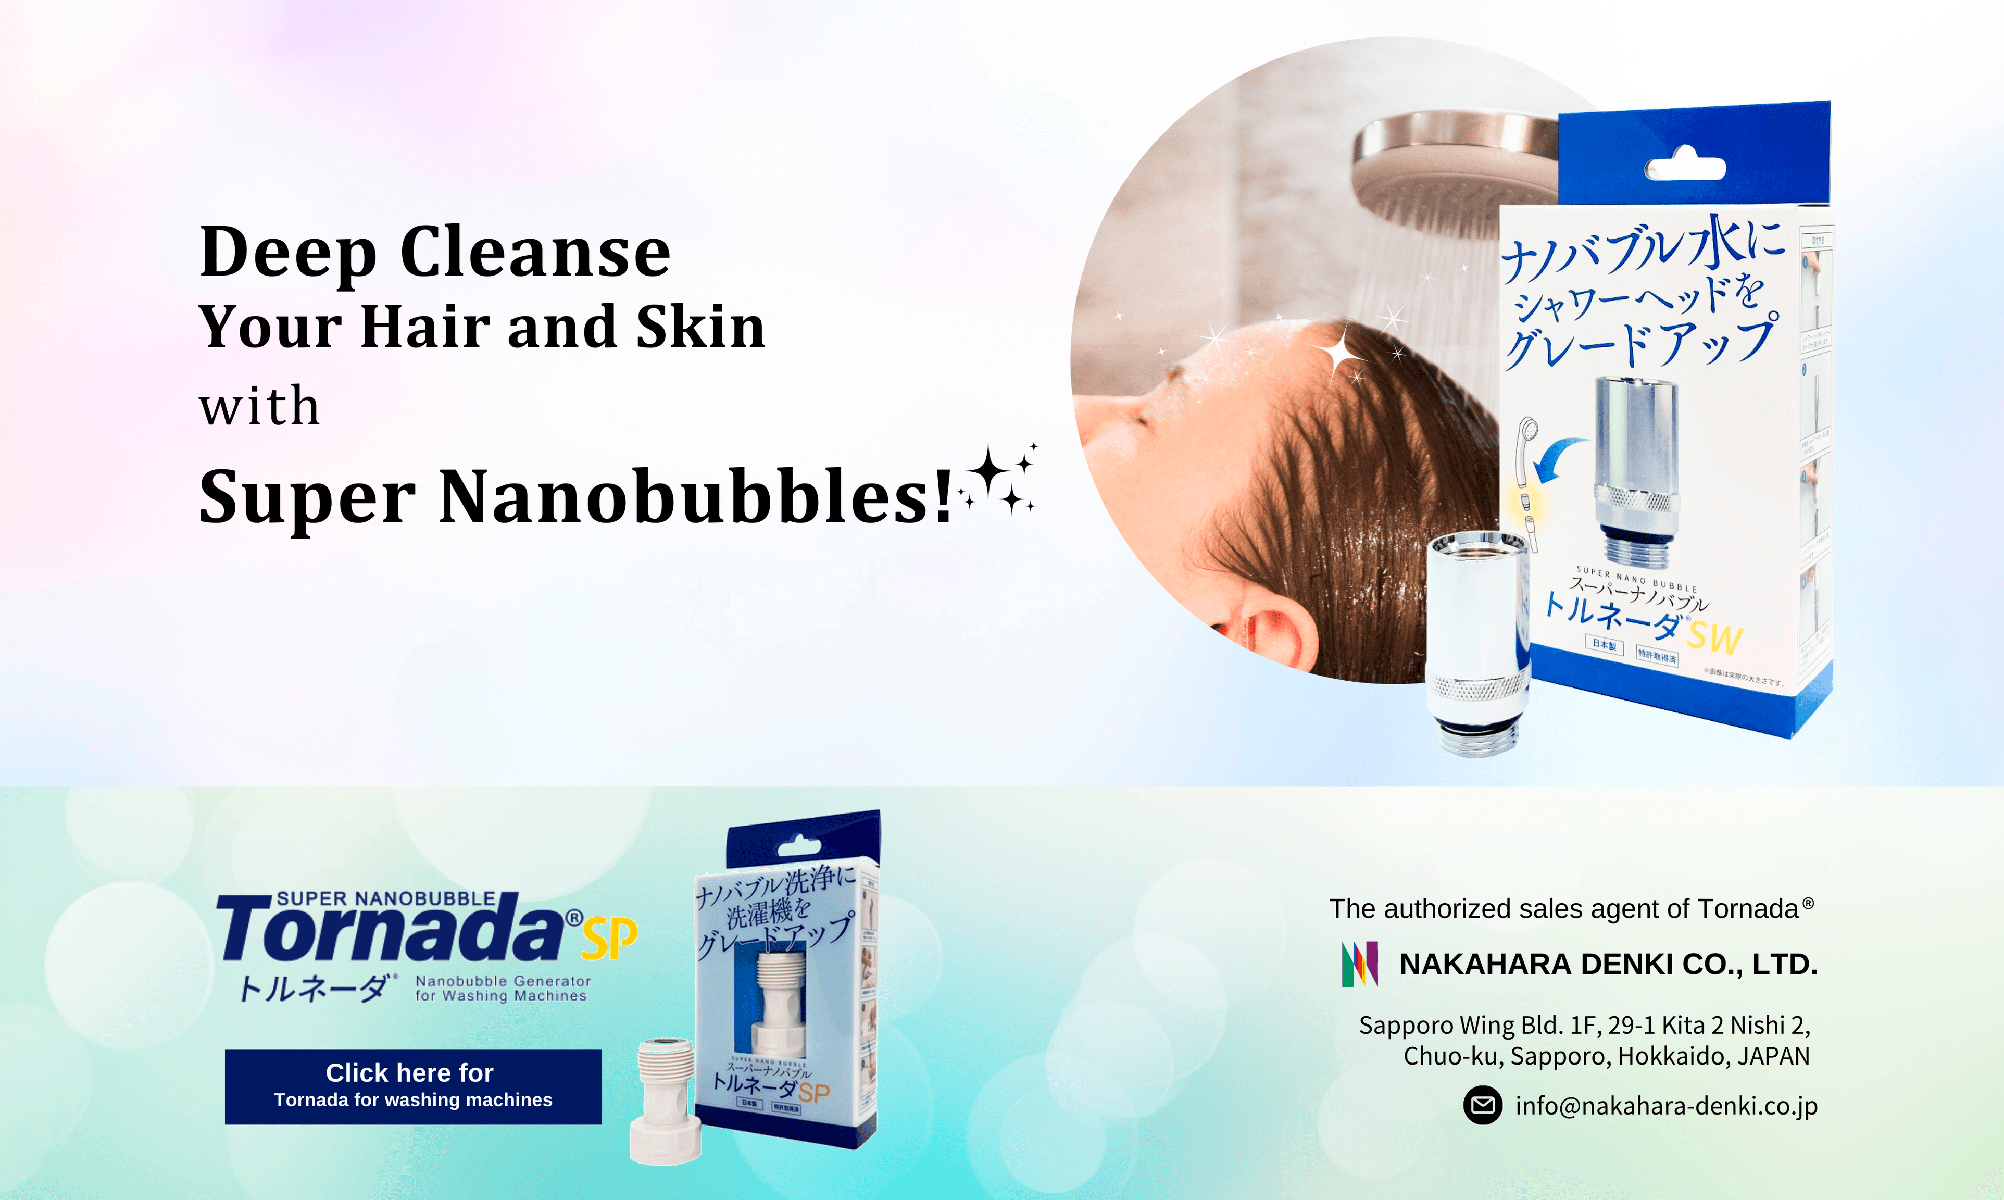 Deep cleanse your hair and skin with Super nanobubbles!